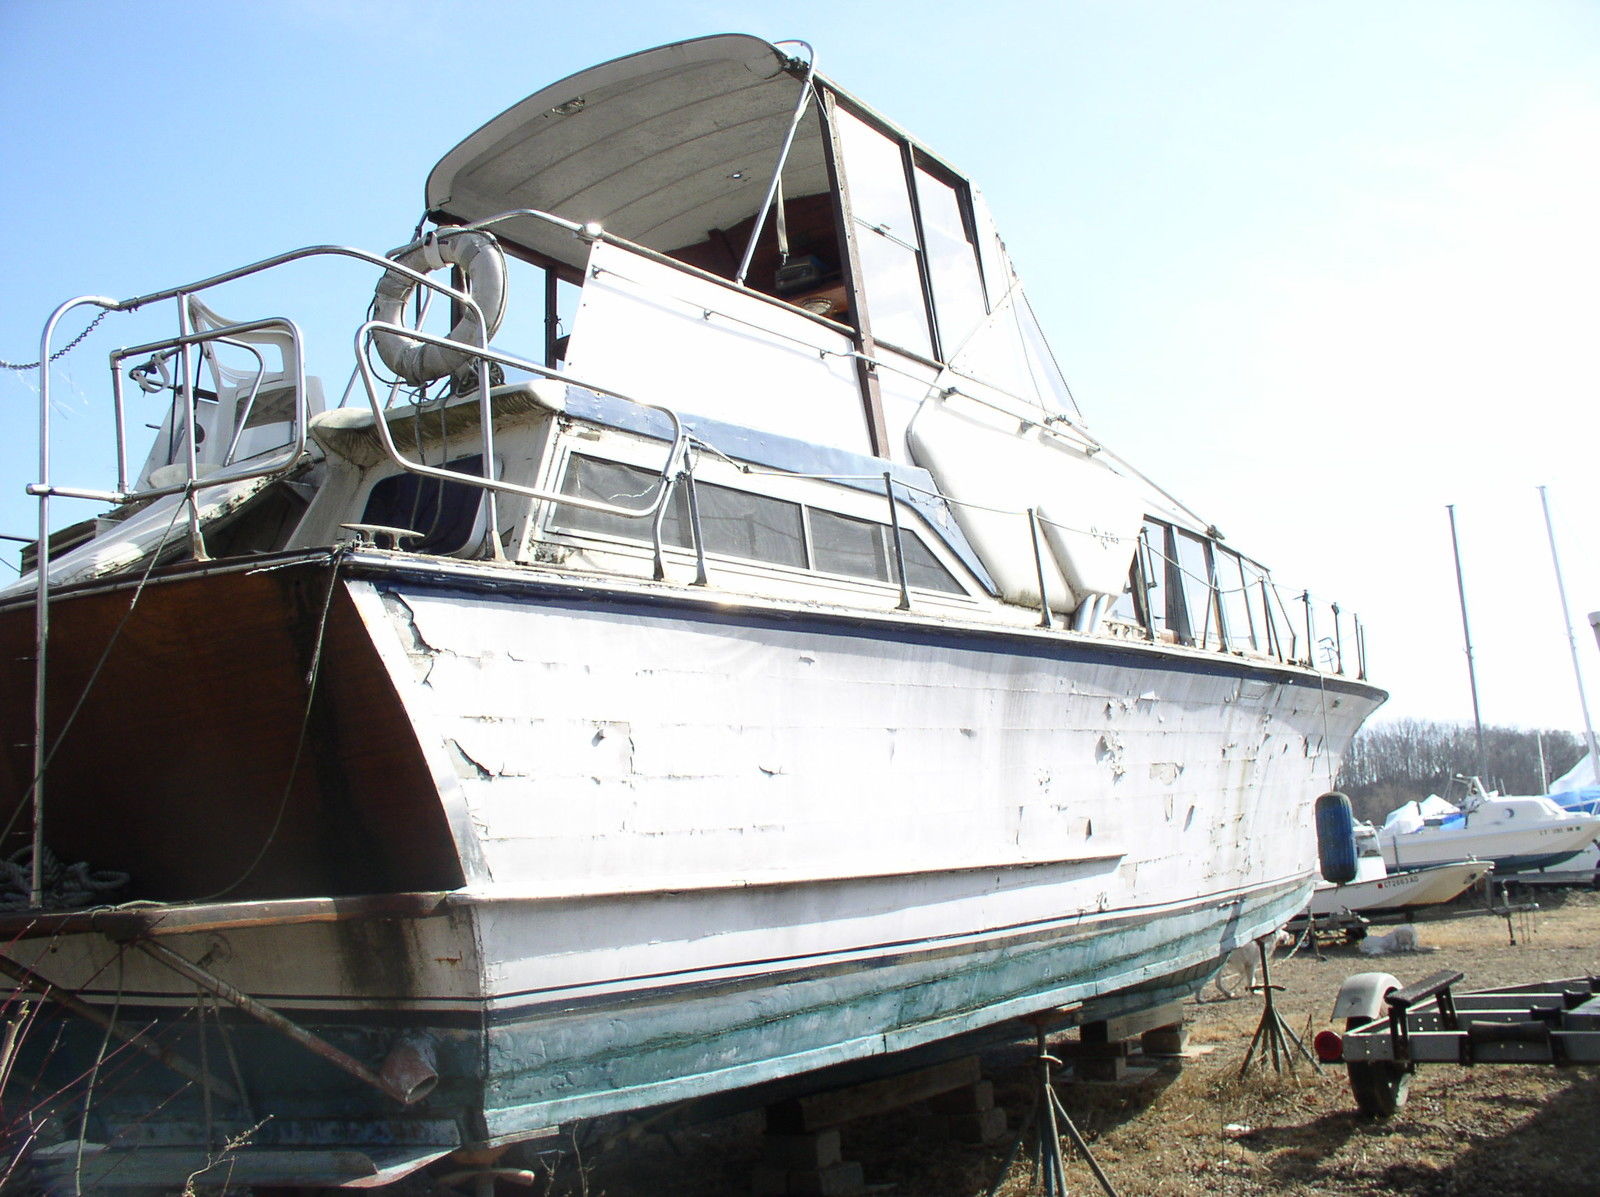 Owens Tahitian 1960 for sale for $8,450 - Boats-from-USA.com